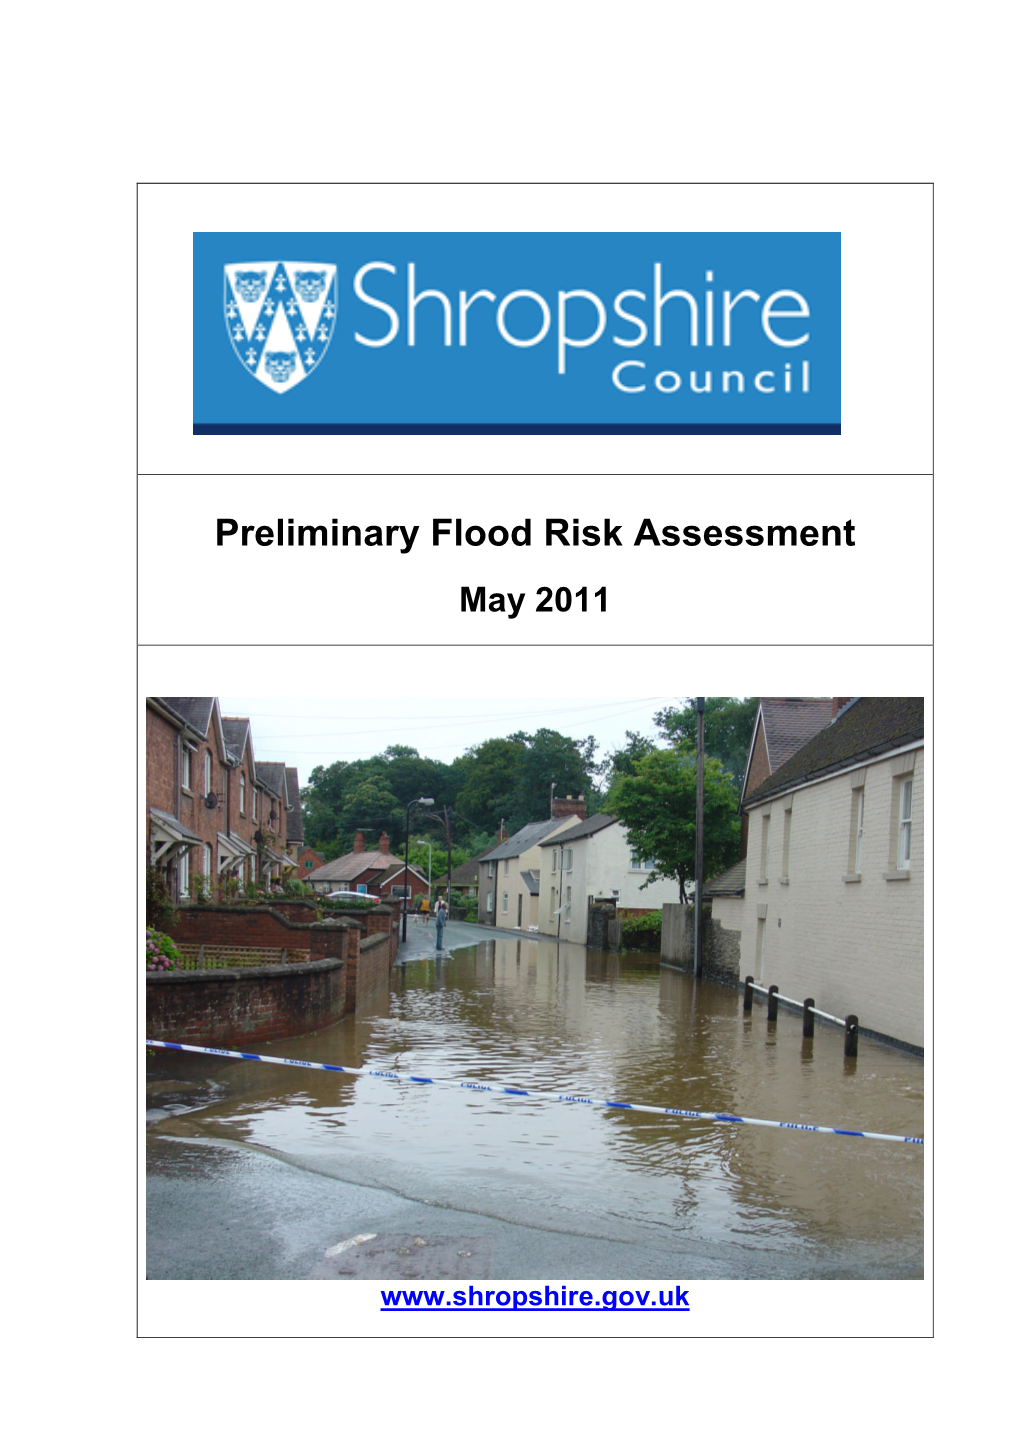 Preliminary Flood Risk Assessment May 2011